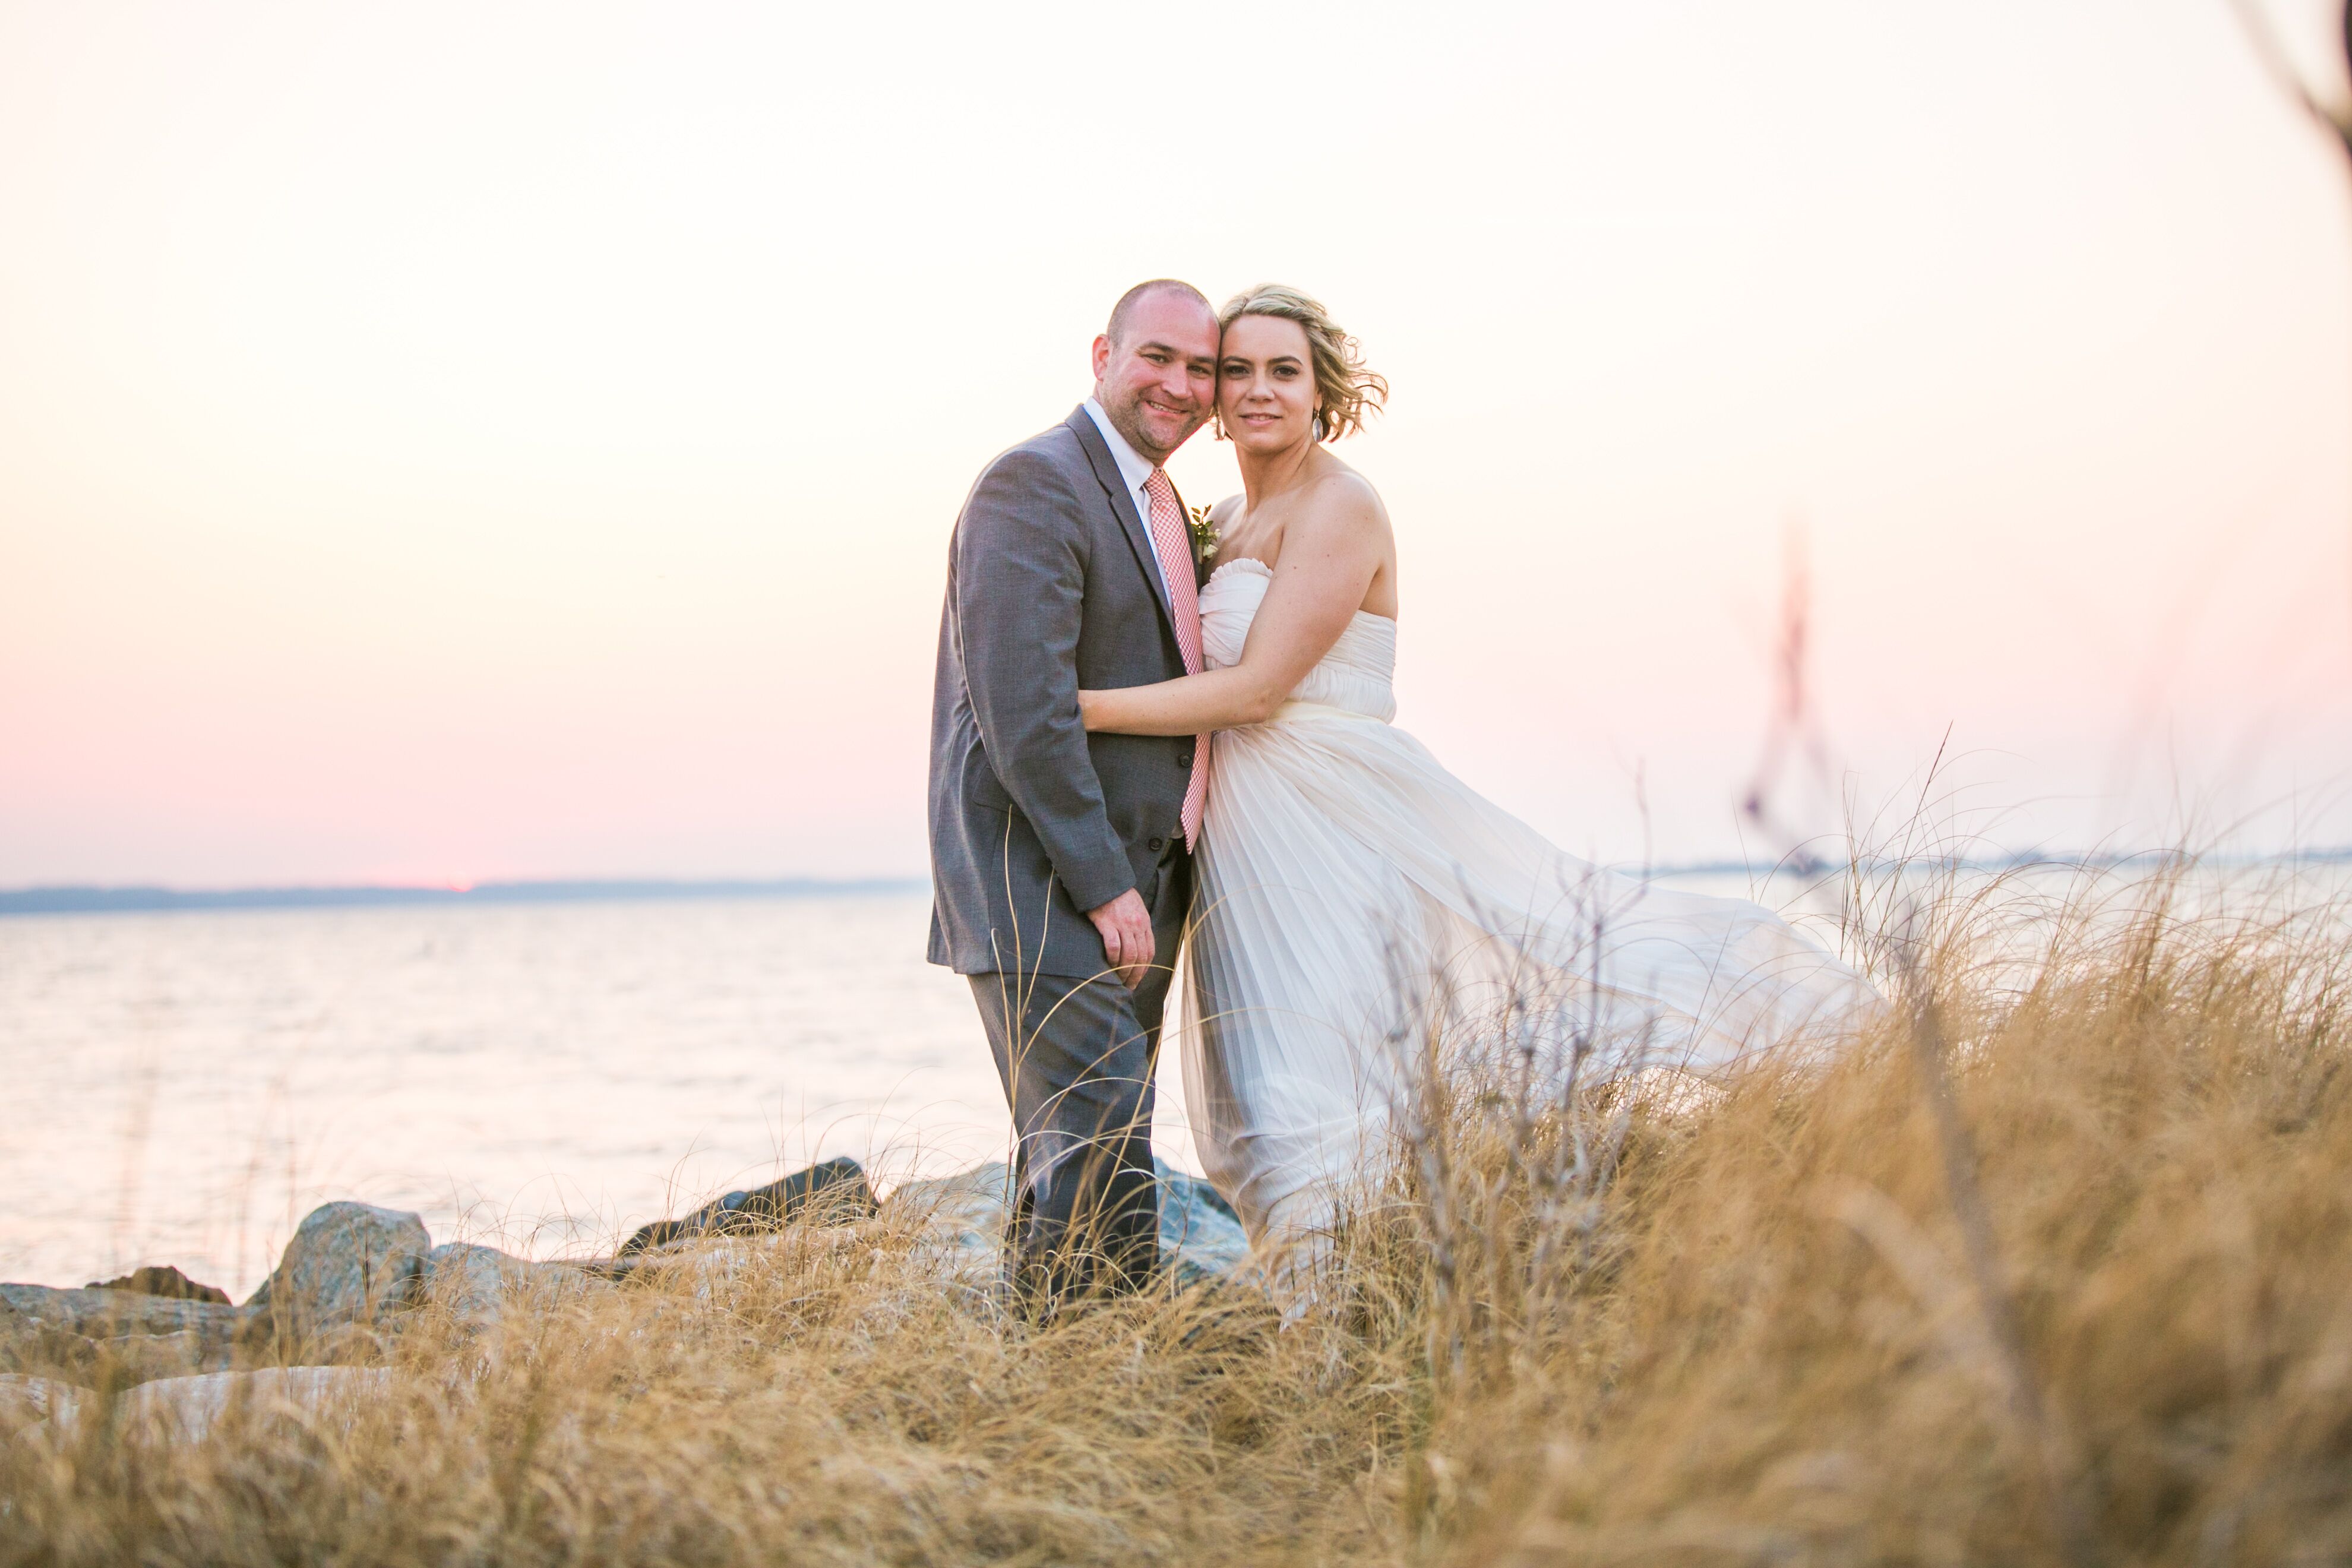 A Rustic Outdoor Barn and Beach Wedding  at Jefferson 